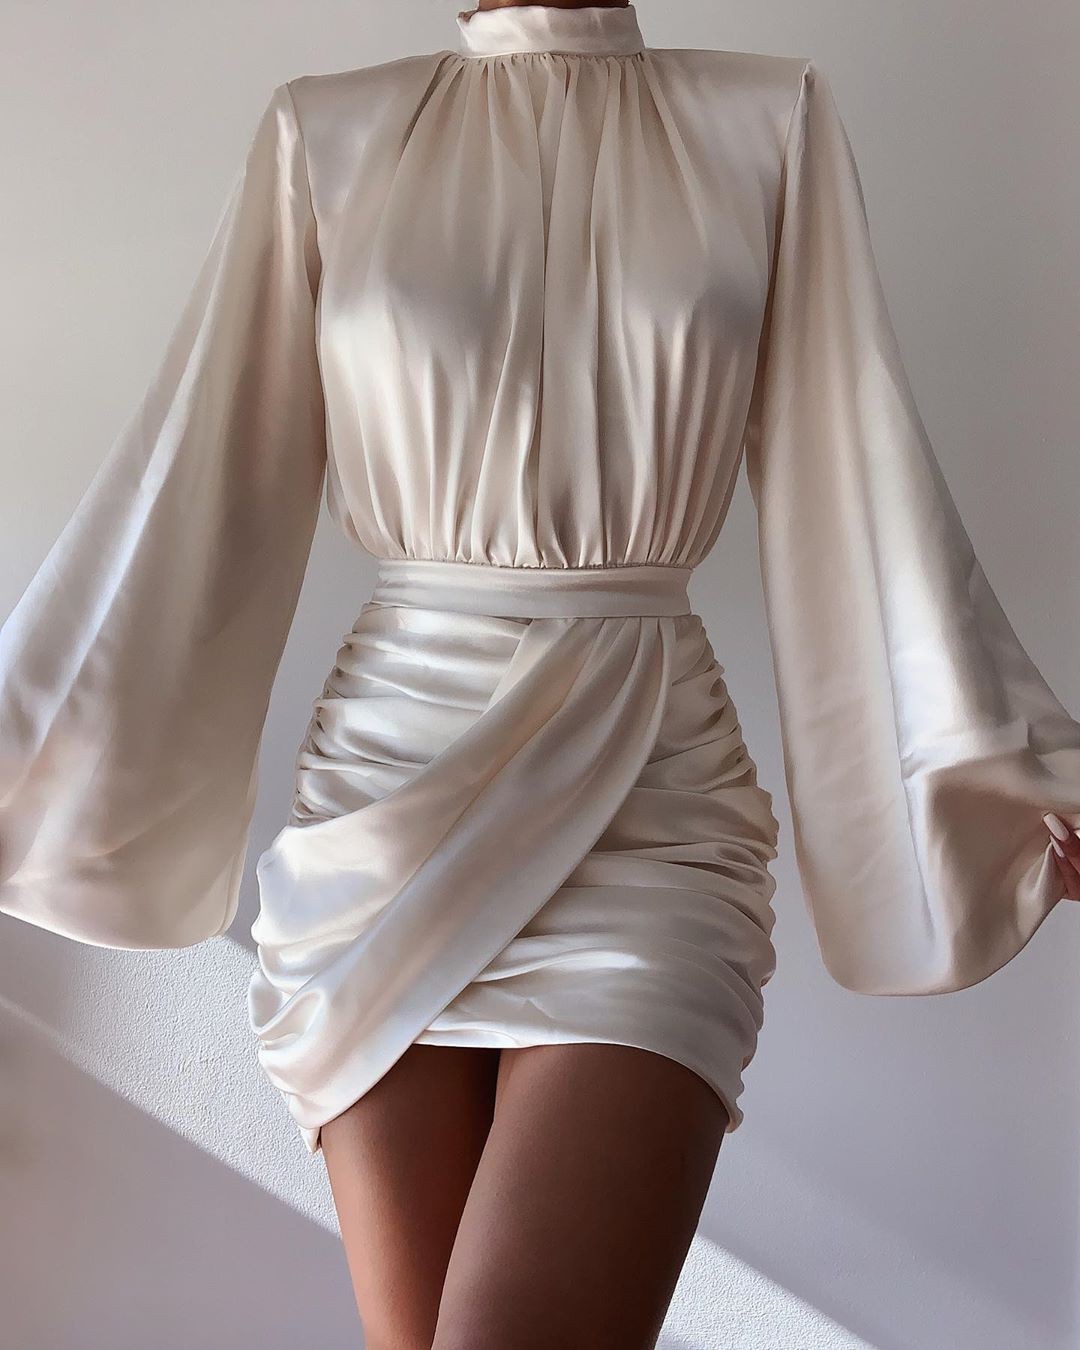 white outfit ideas with silk cocktail dress, fashion ideas: Cocktail Dresses,  White Dress,  White Cocktail Dress  